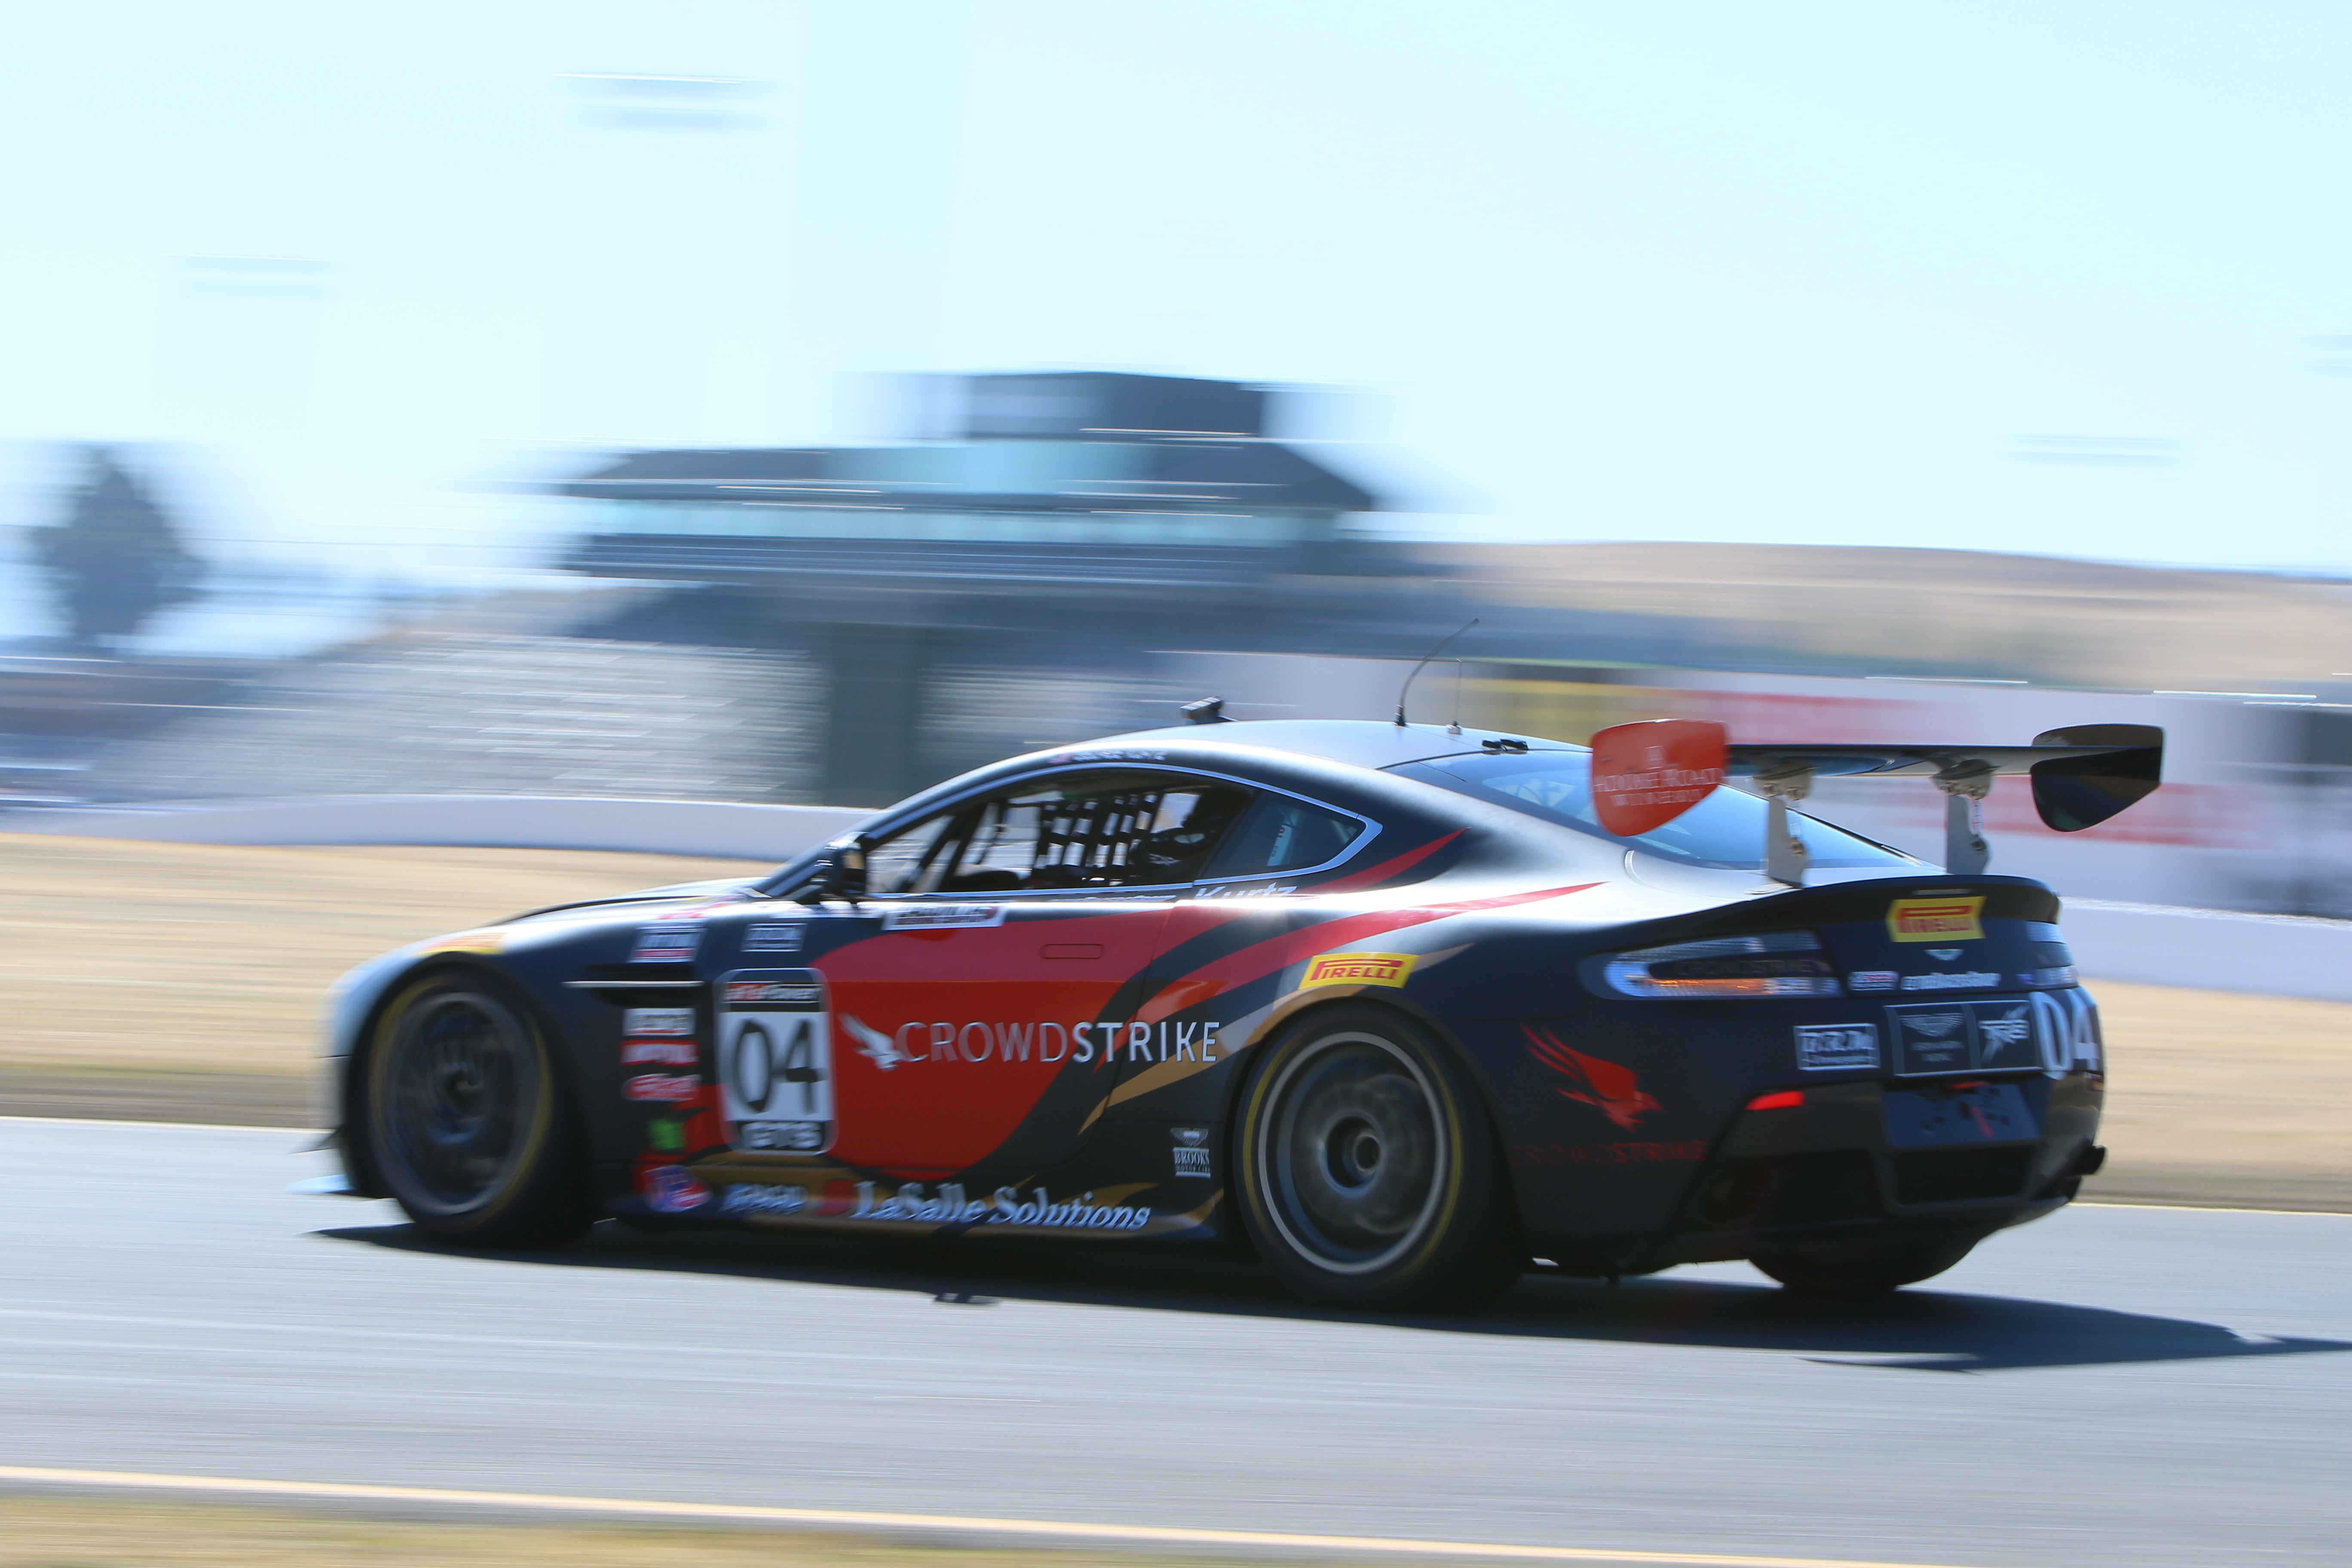 TRG-AMR Celebrates Home Pirelli World Challenge Race with Three Cars at Sonoma Raceway